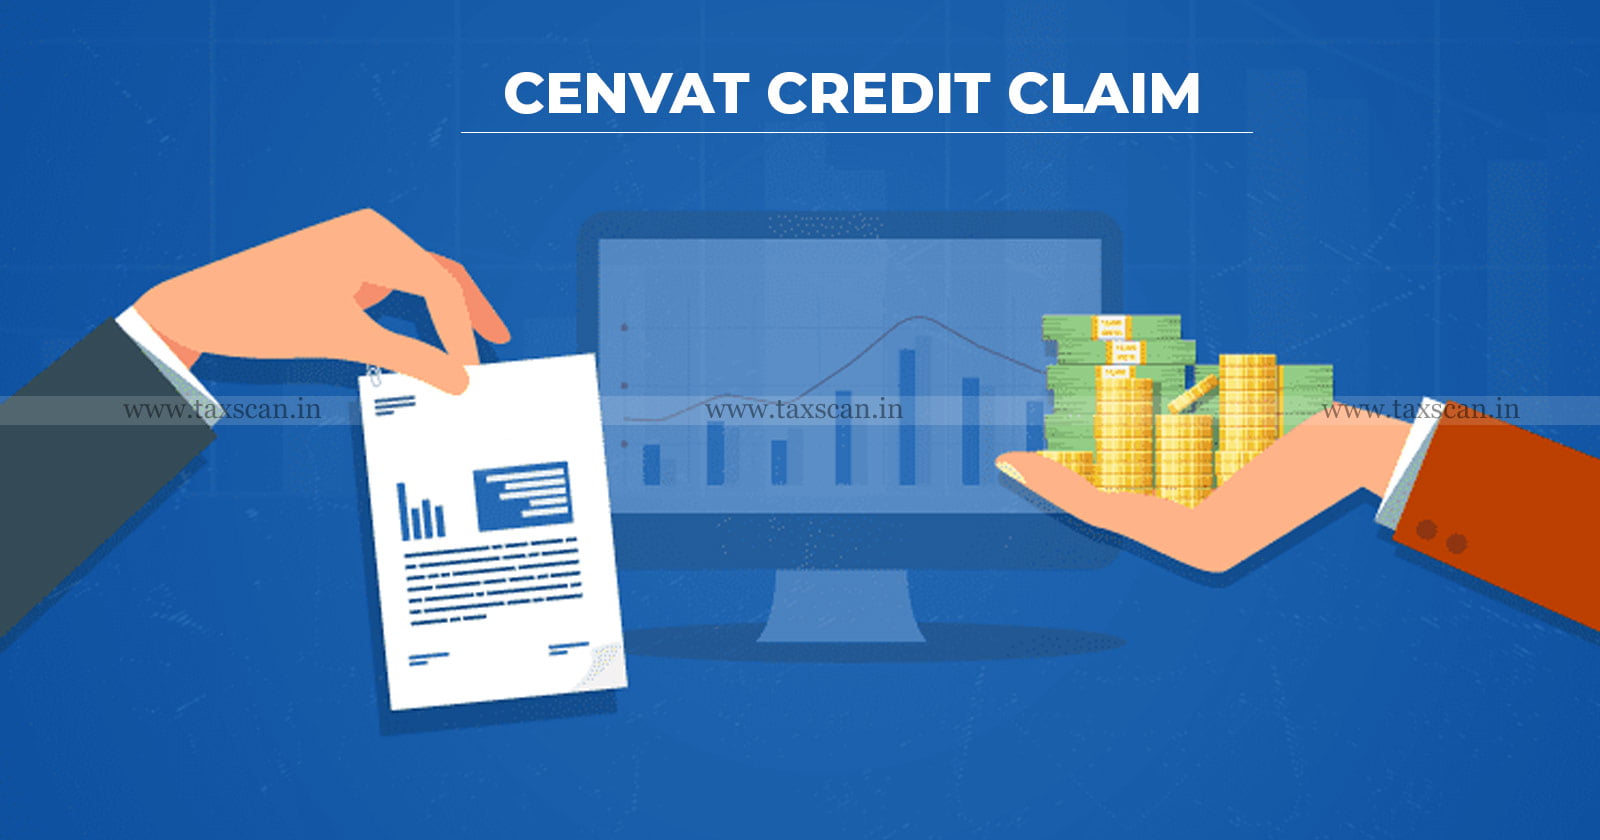 CENVAT - Credit - Claim - Chance - to - Produce - Documents - Demand - Order - Invalid - CESTAT - TAXSCAN